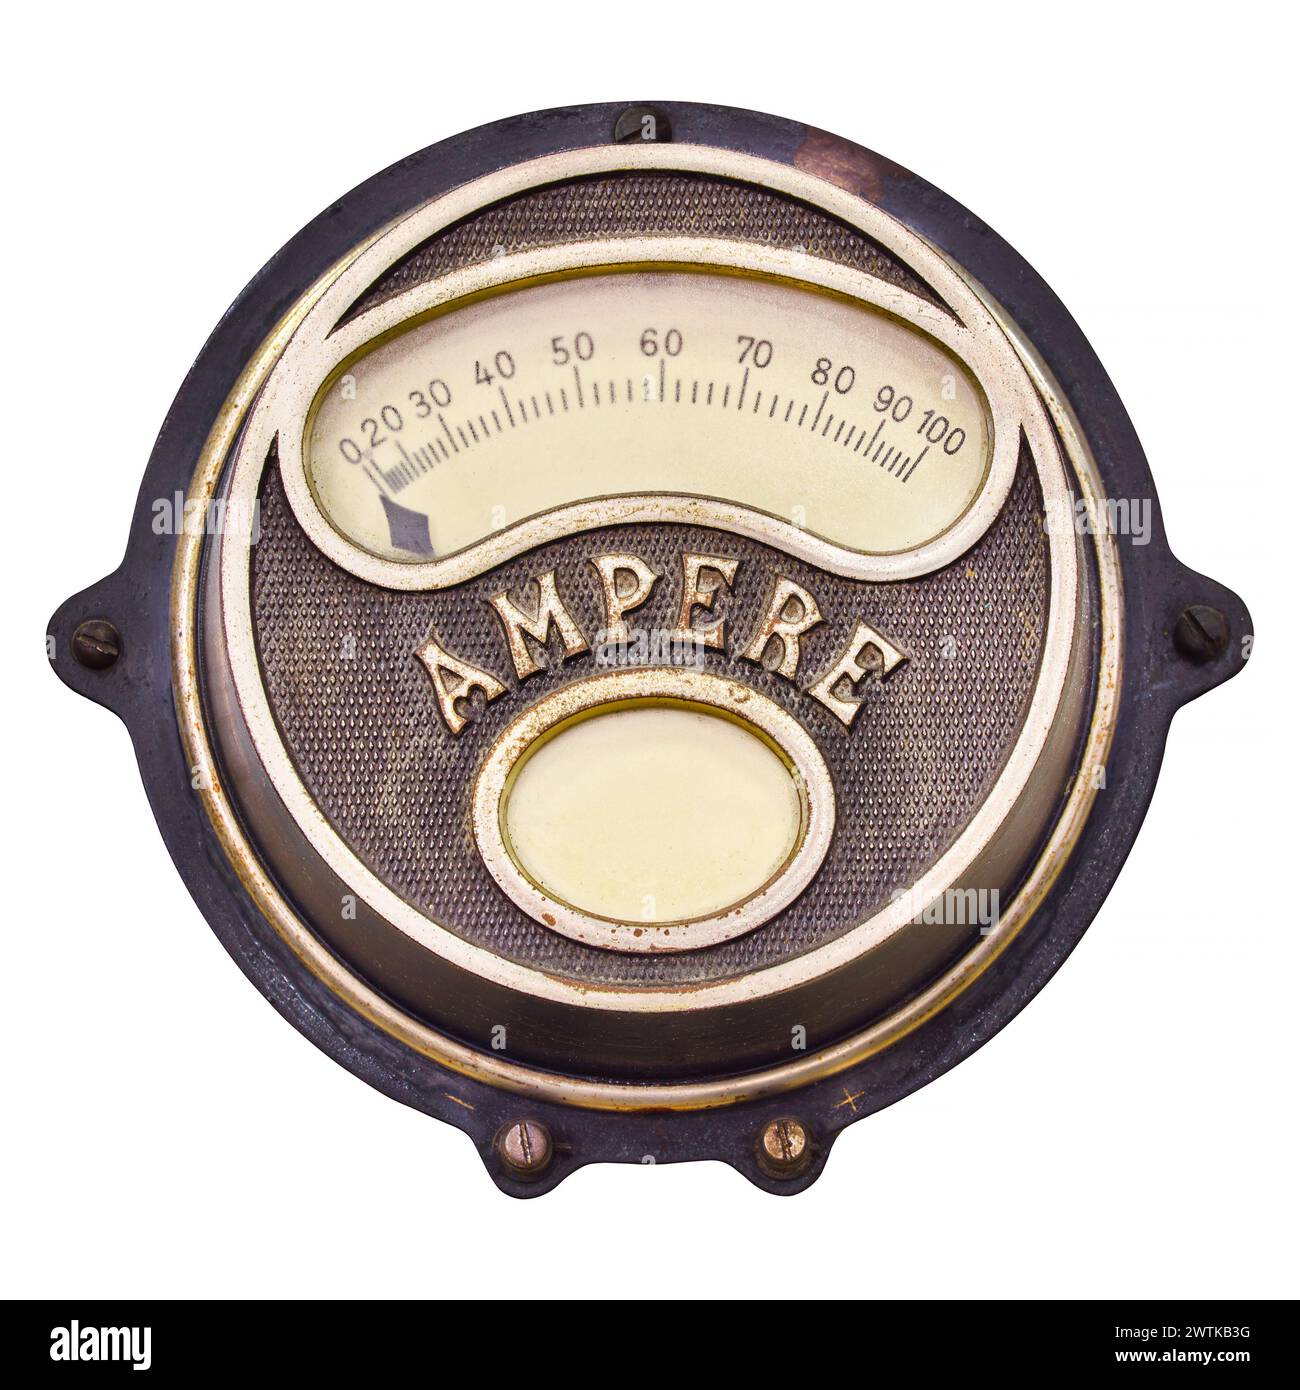 Vintage circular analog ampere meter isolated on a white background Stock Photo